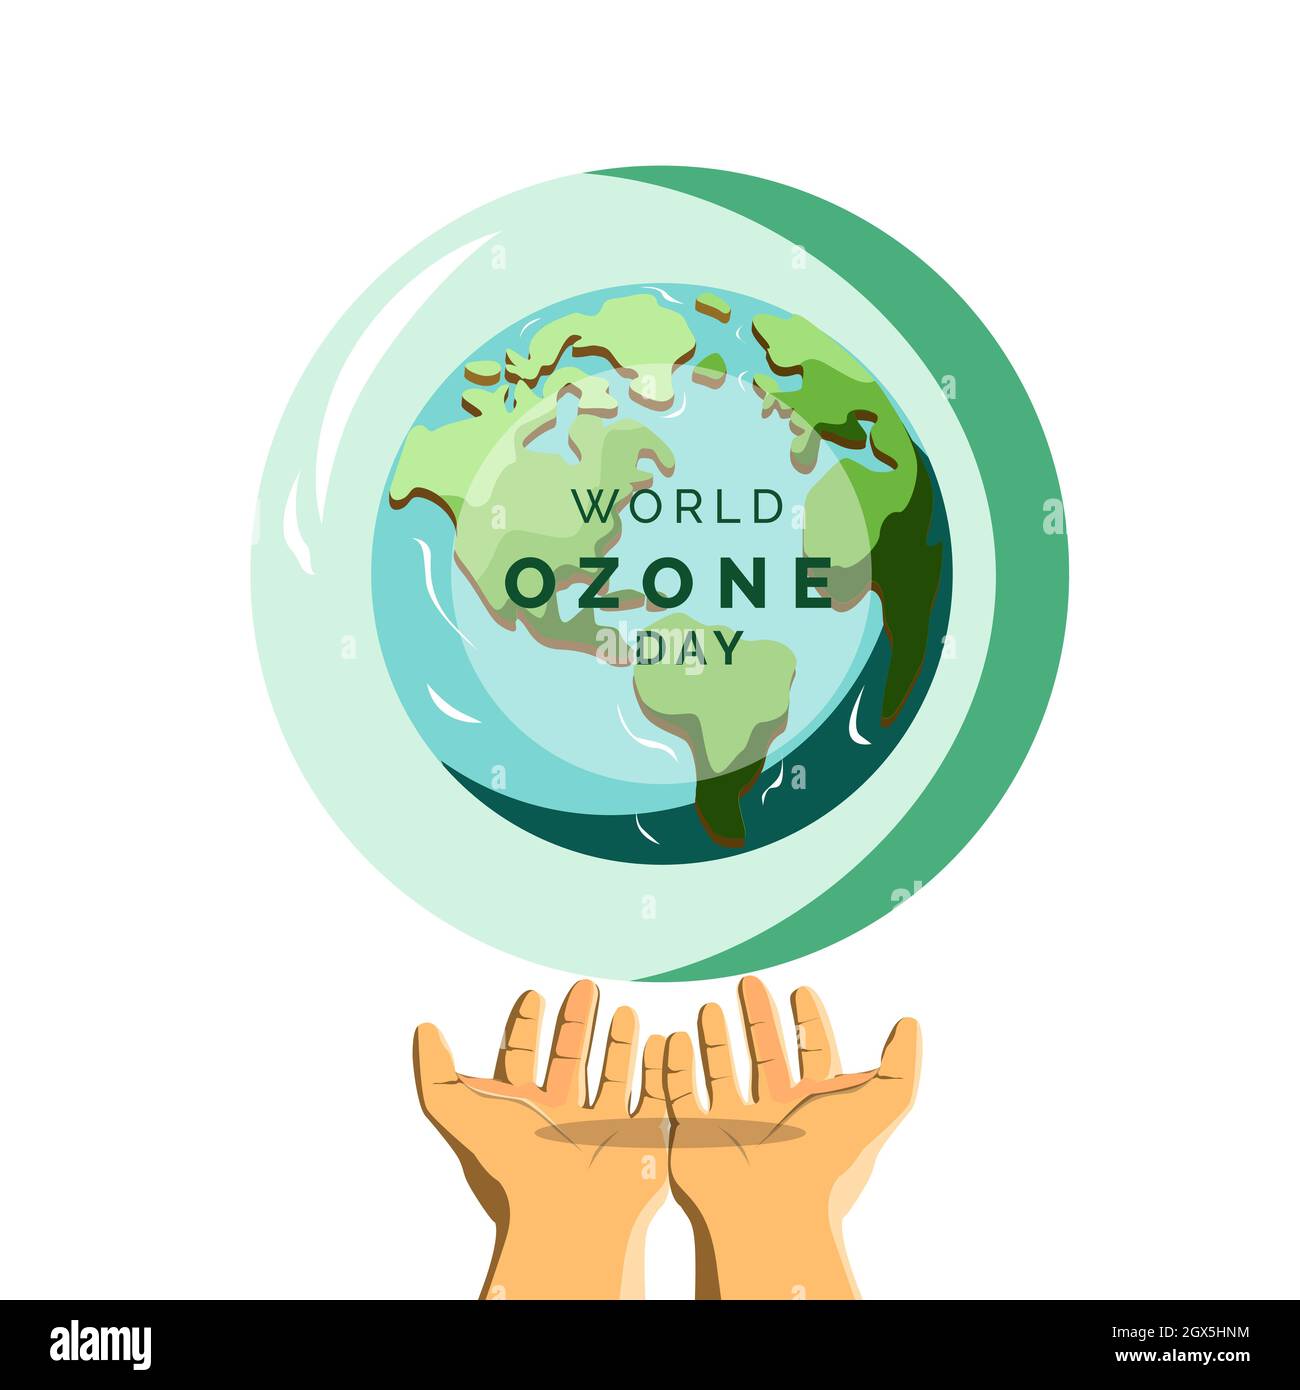 Ozone Layer poster drawing easy | Save earth save ozone layer poster | Ozone  Day Drawing - YouTube